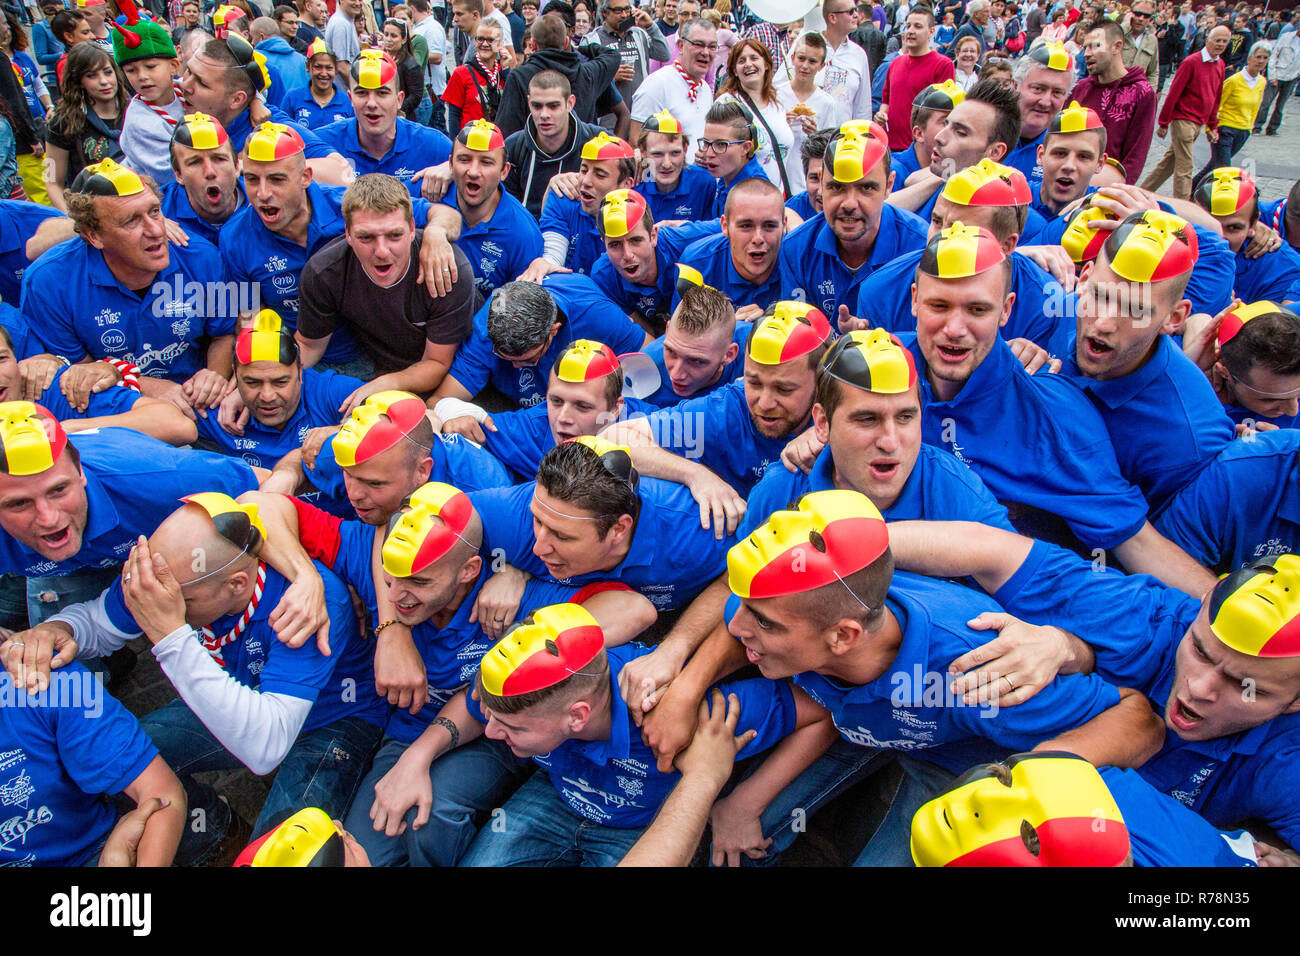 Crowd with the Belgian flag as a mask on their heads, Doudou city festival in Grand Place square, Mons, Belgium Stock Photo